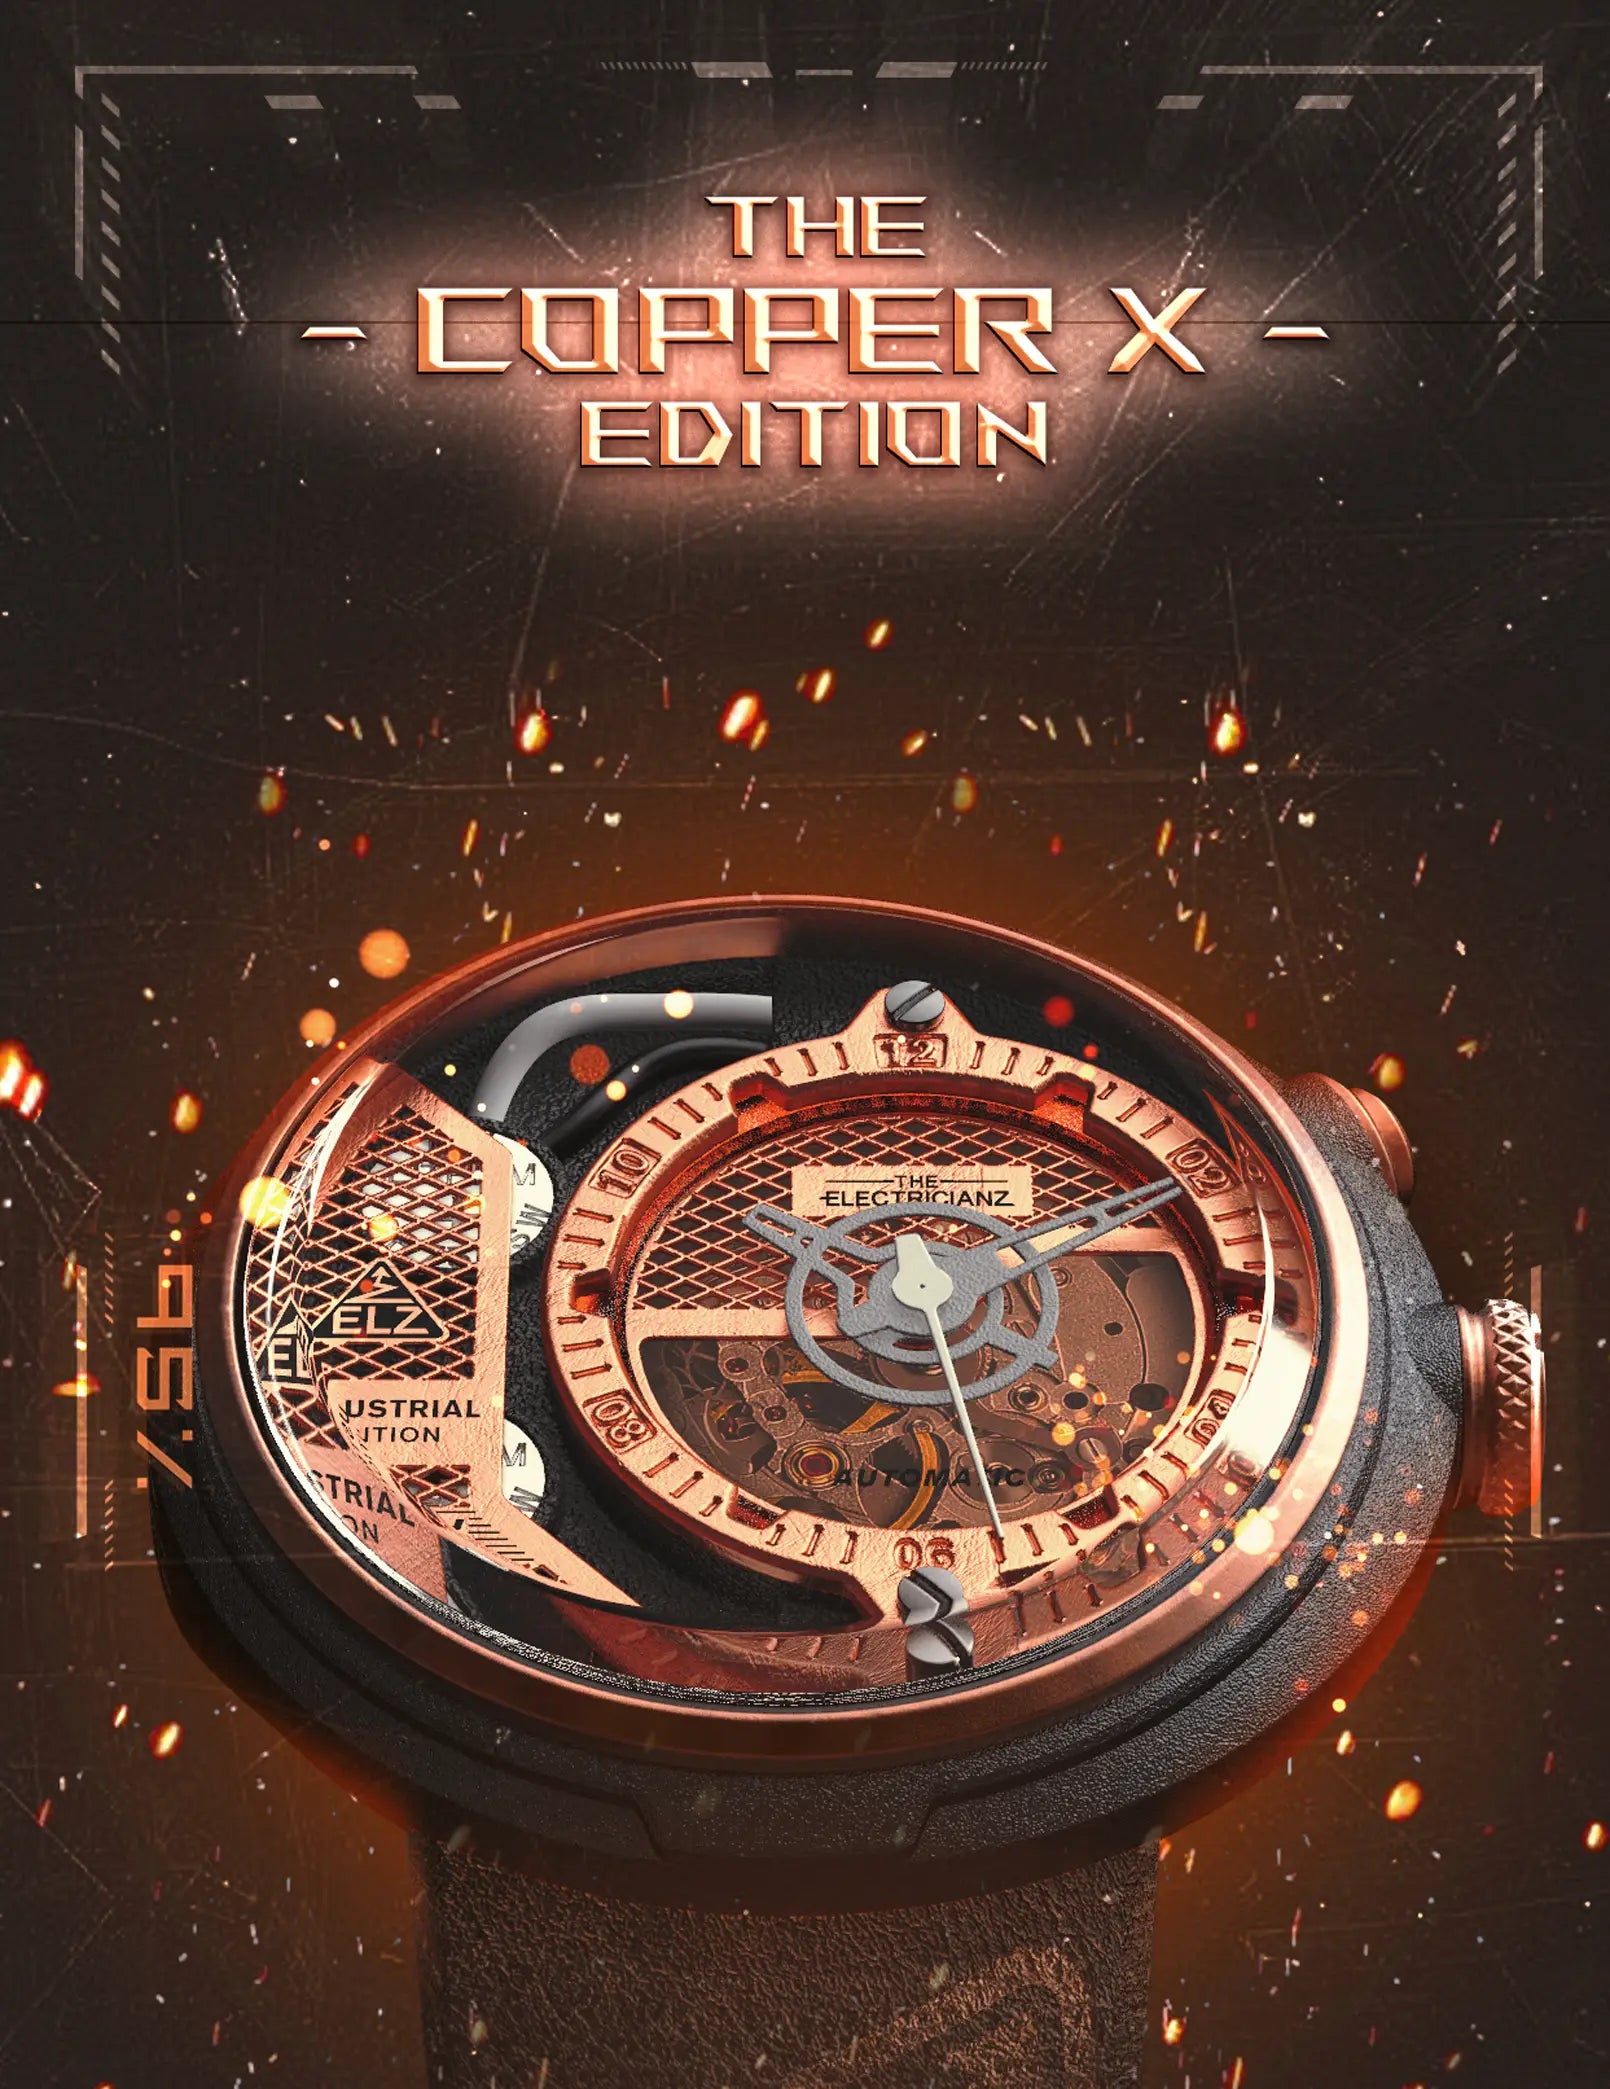 Copper-x clothing system